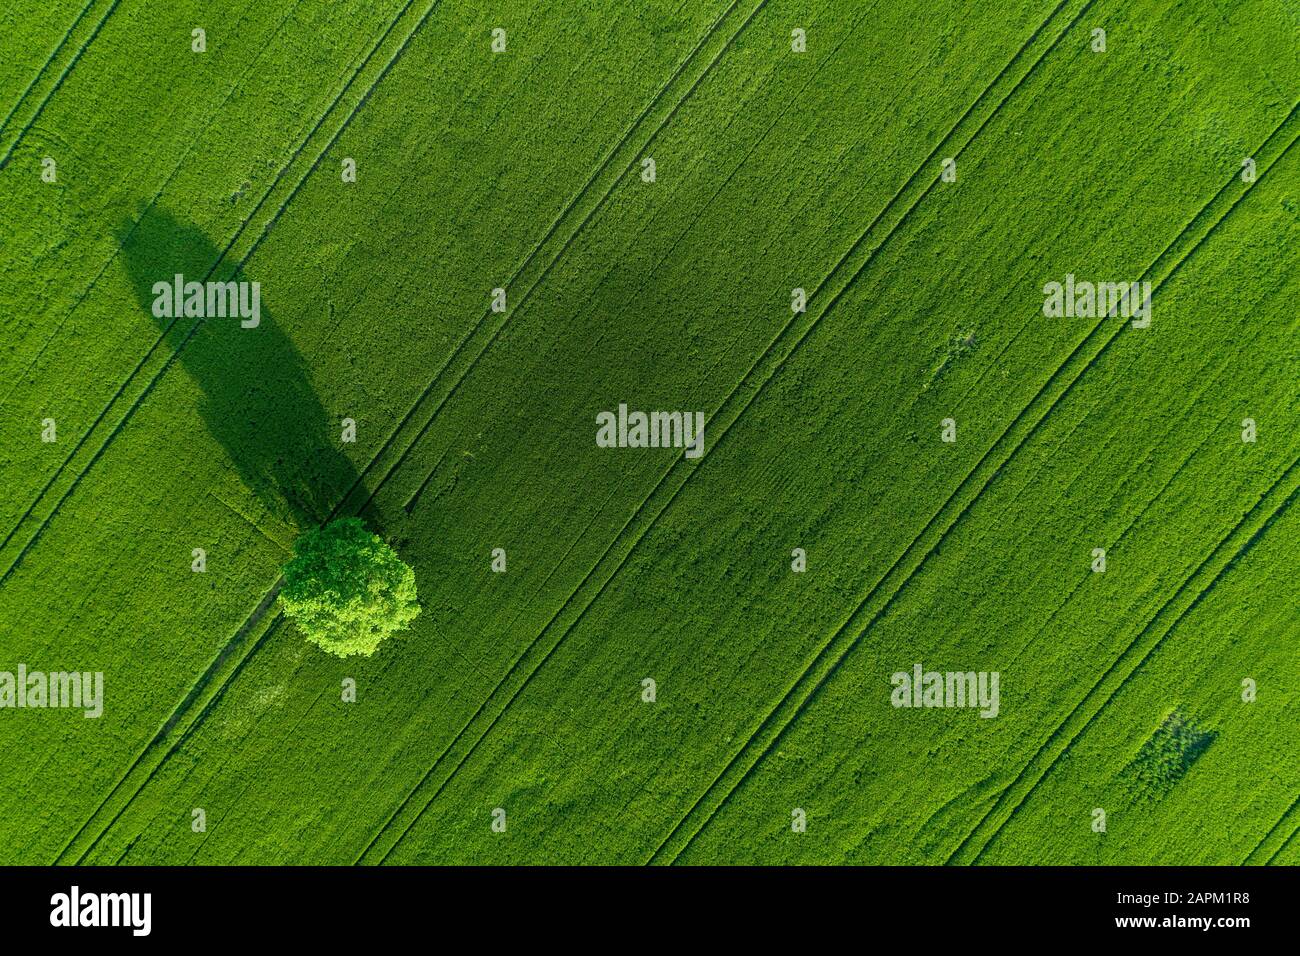 Aerial view of solitude tree in green agricultural field. Saale-Orla-Kreis, Thuringia, Germany. Stock Photo